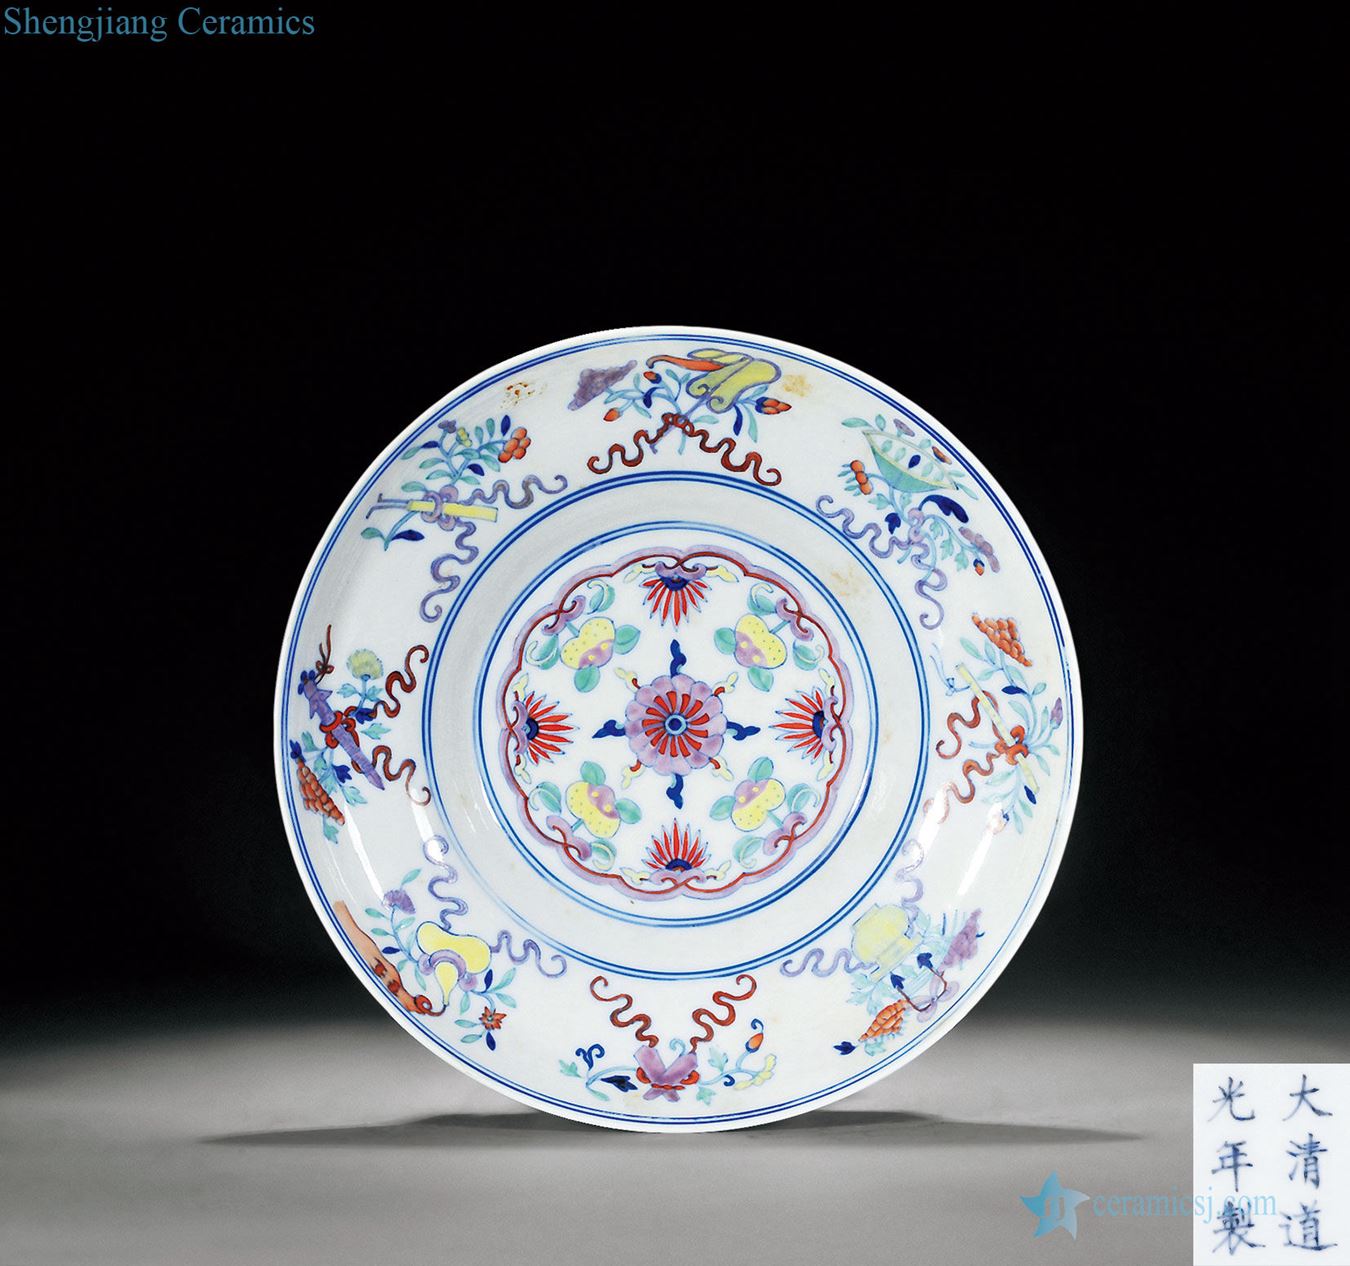 In late qing dynasty Inside the bucket color dark the eight immortals wrap a branch flowers lines or disk